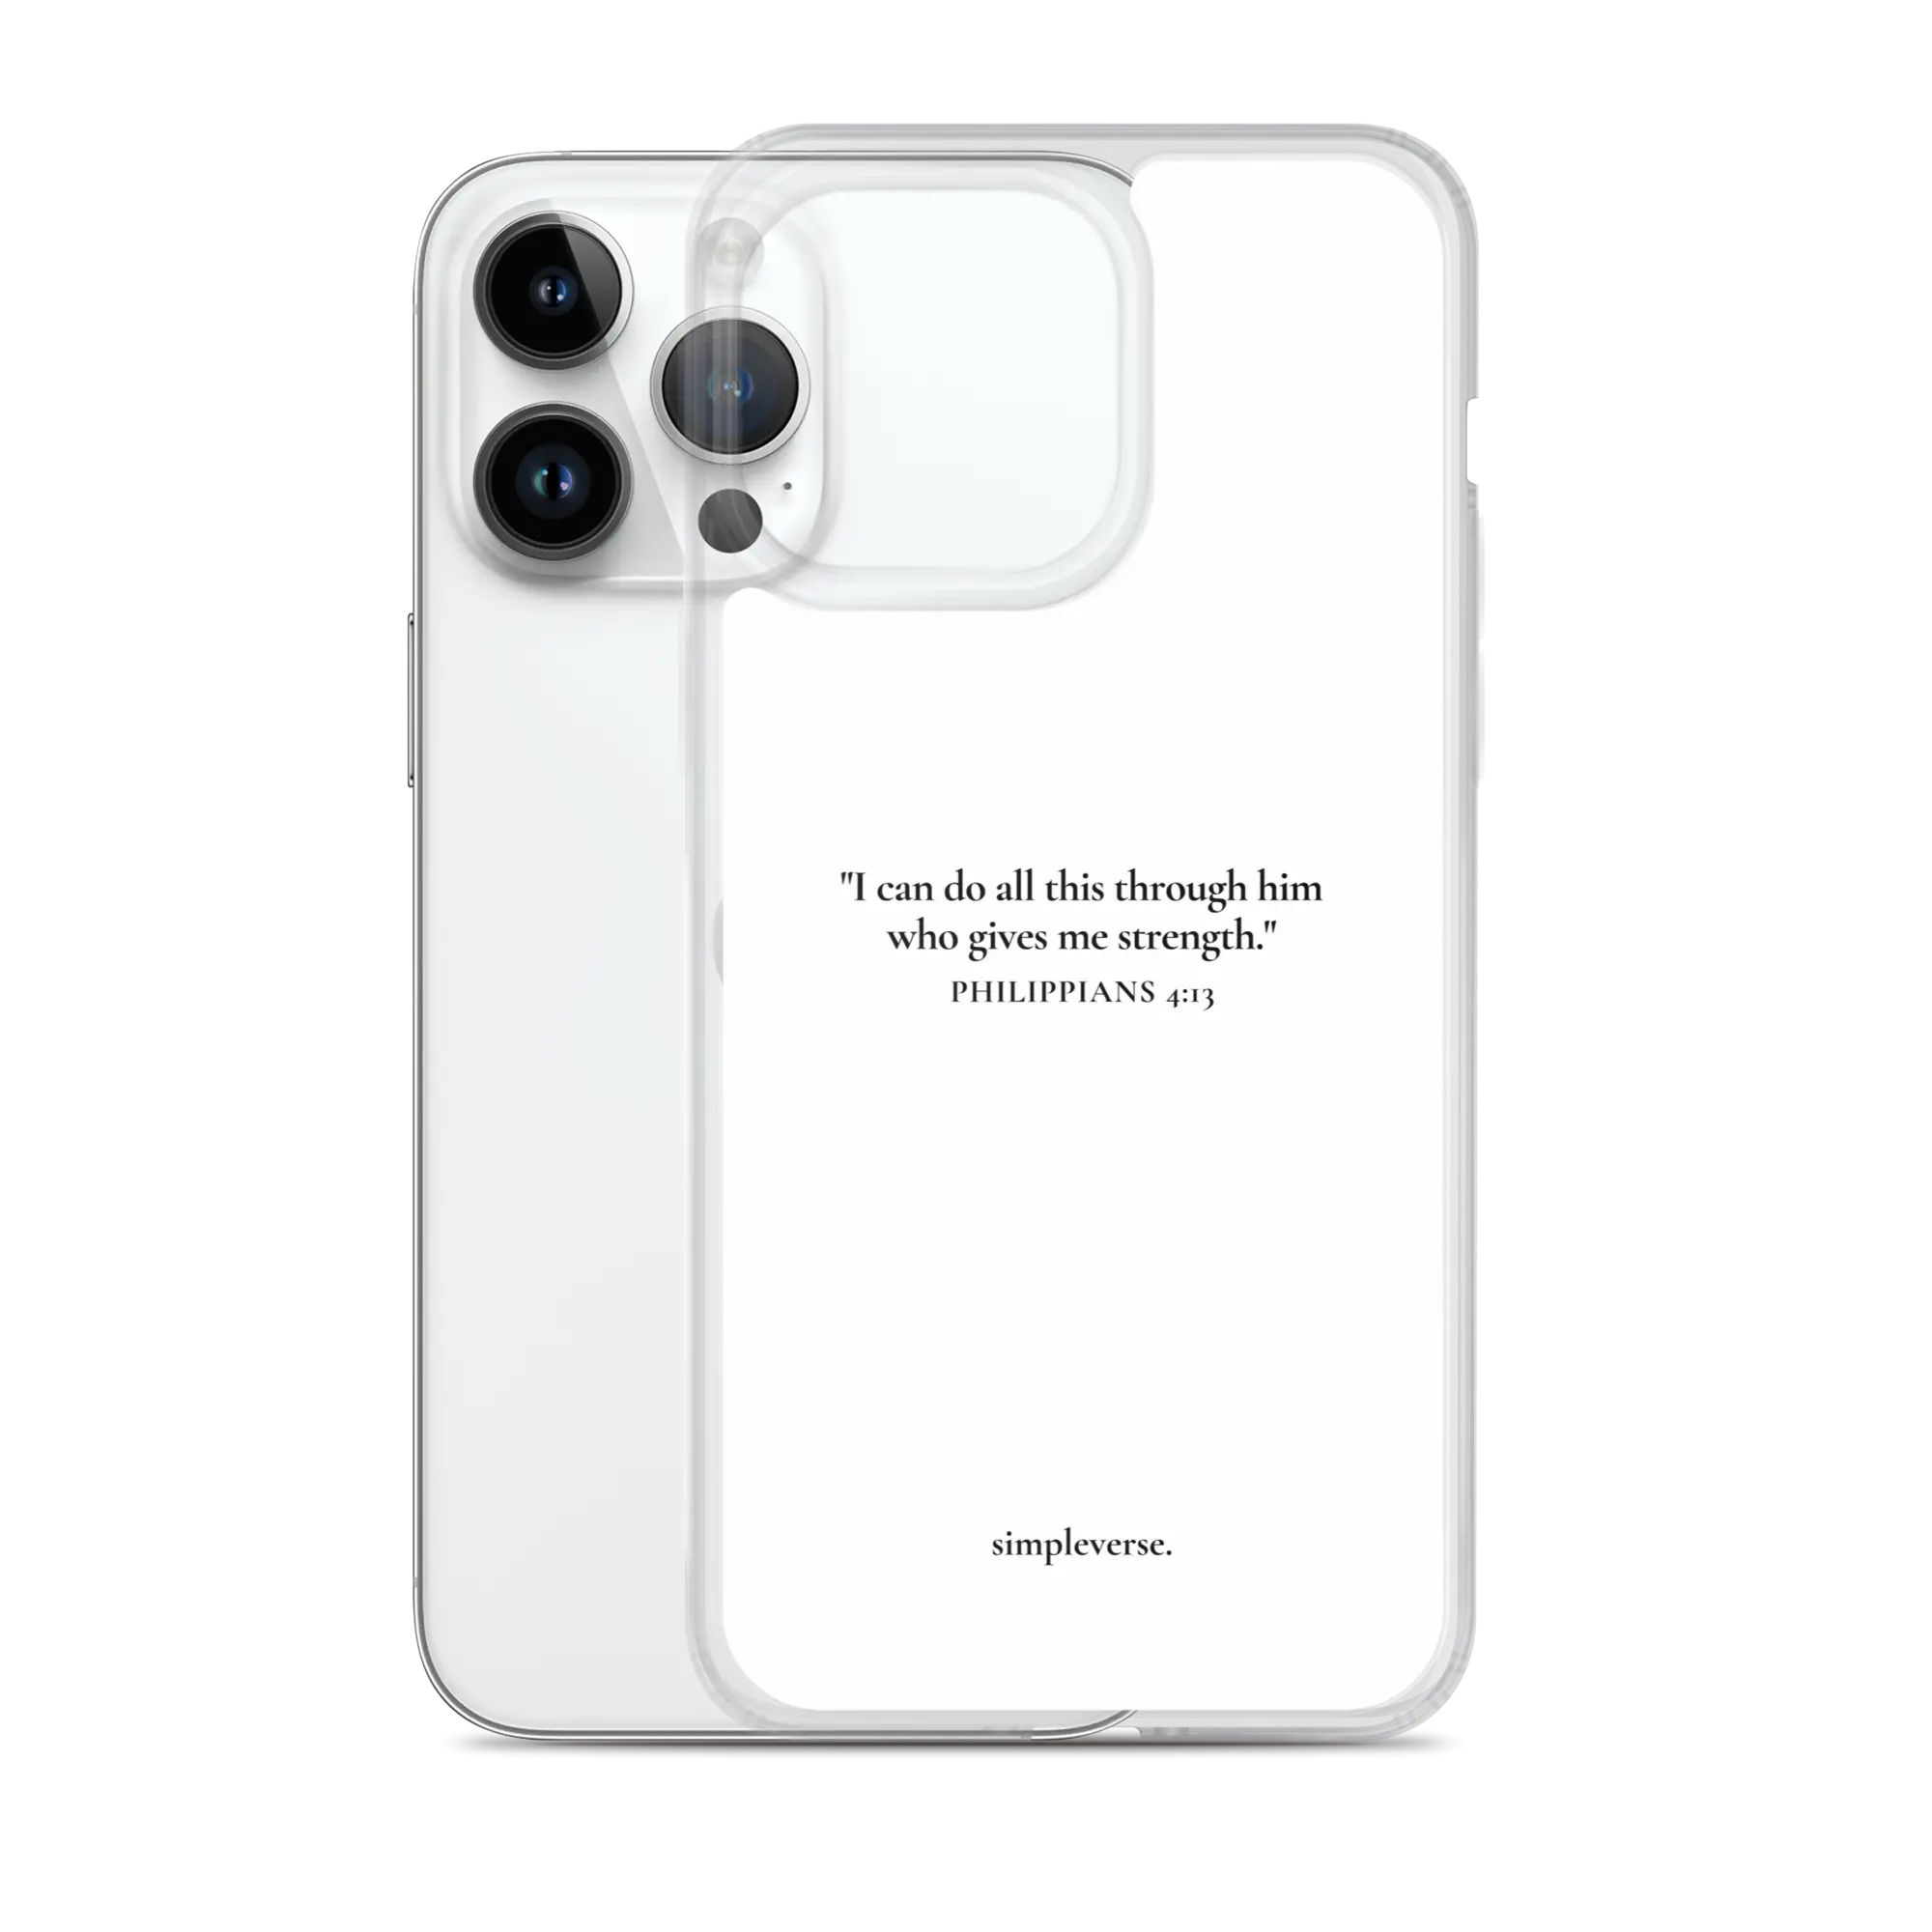 White Christian iPhone case with the verse 'I can do all this through him who gives me strength - Philippians 4:13' printed on the back.